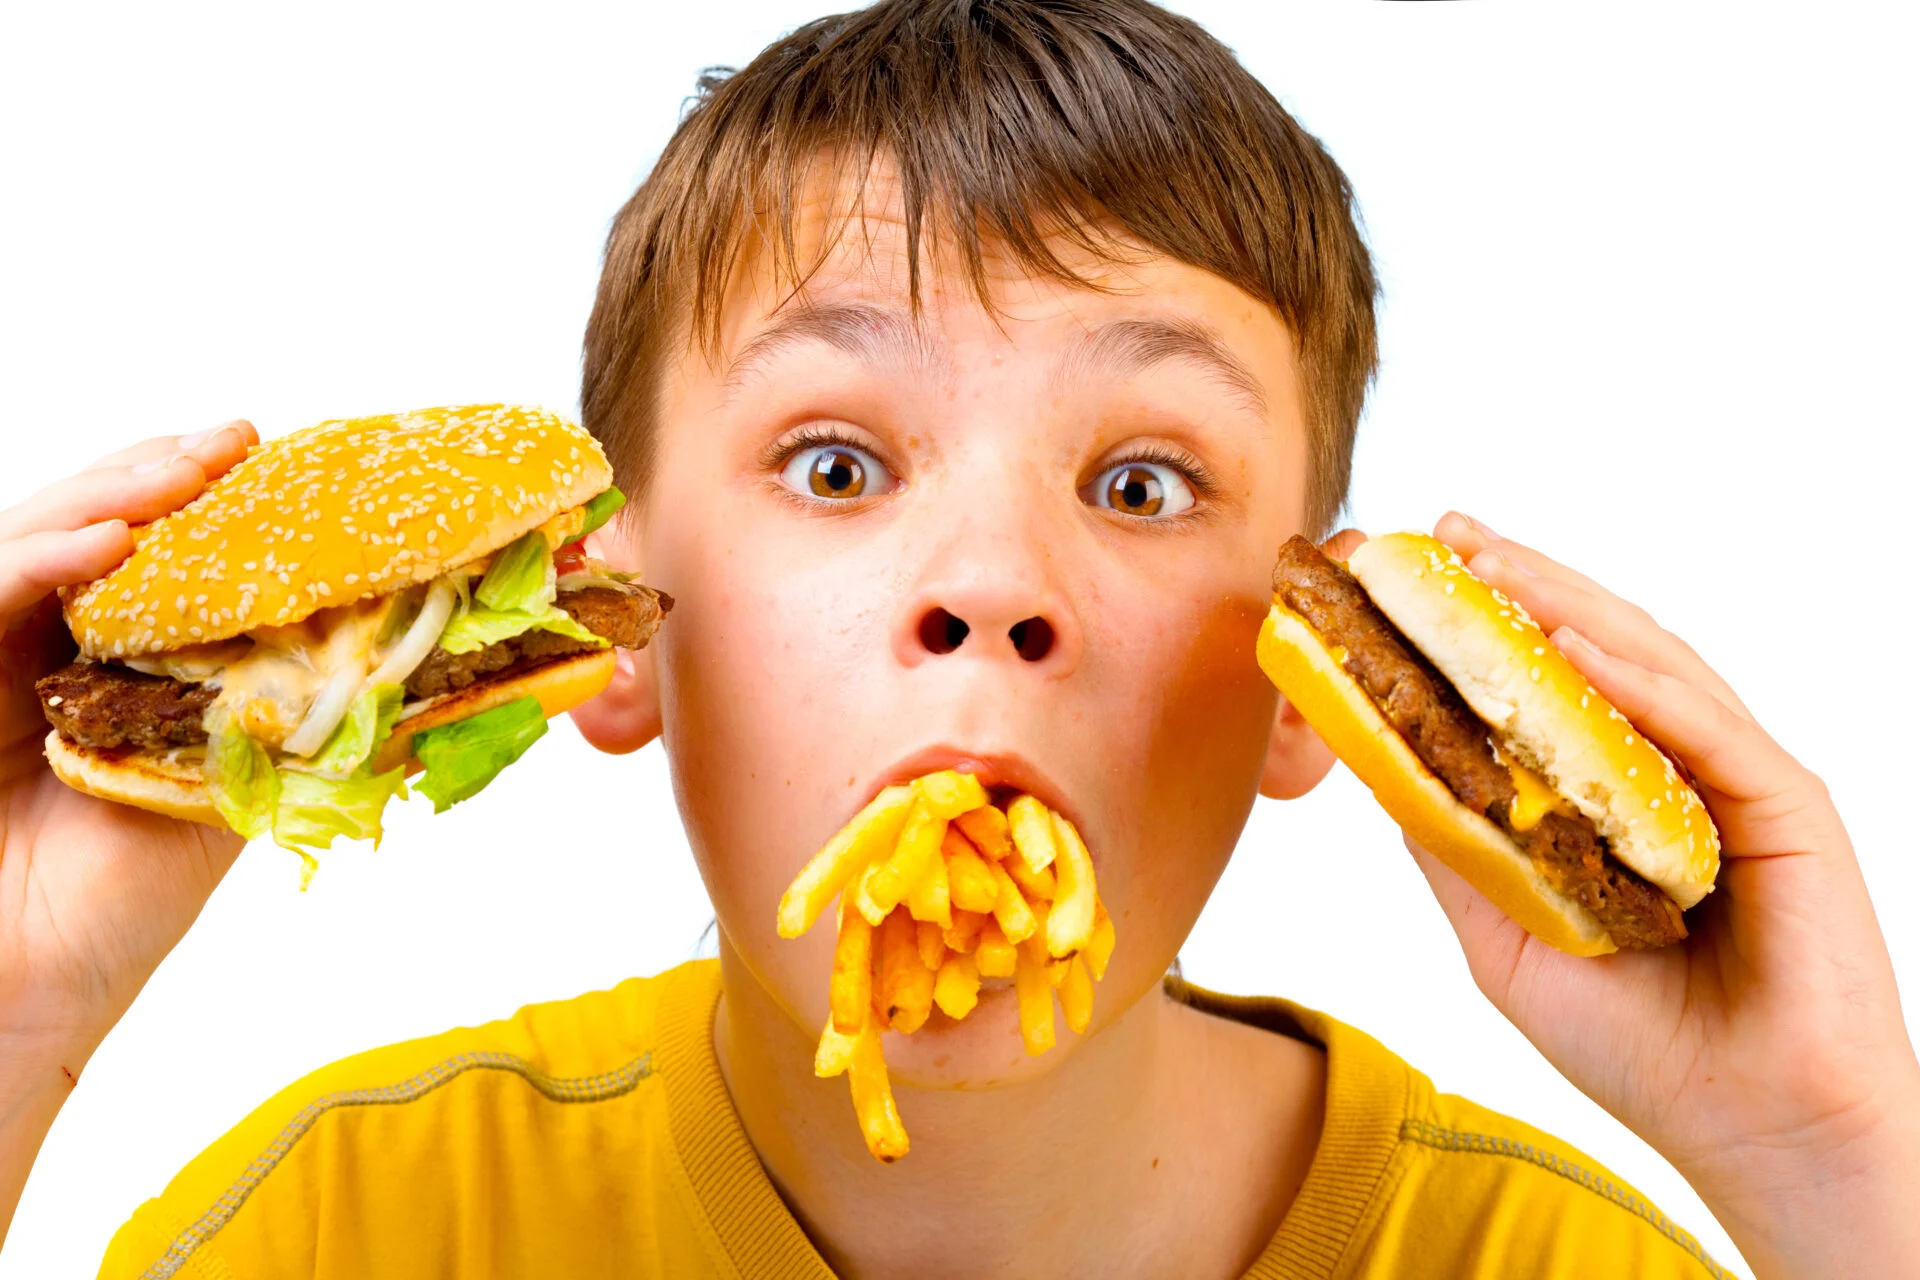 Boy with fast food meal in his mouth